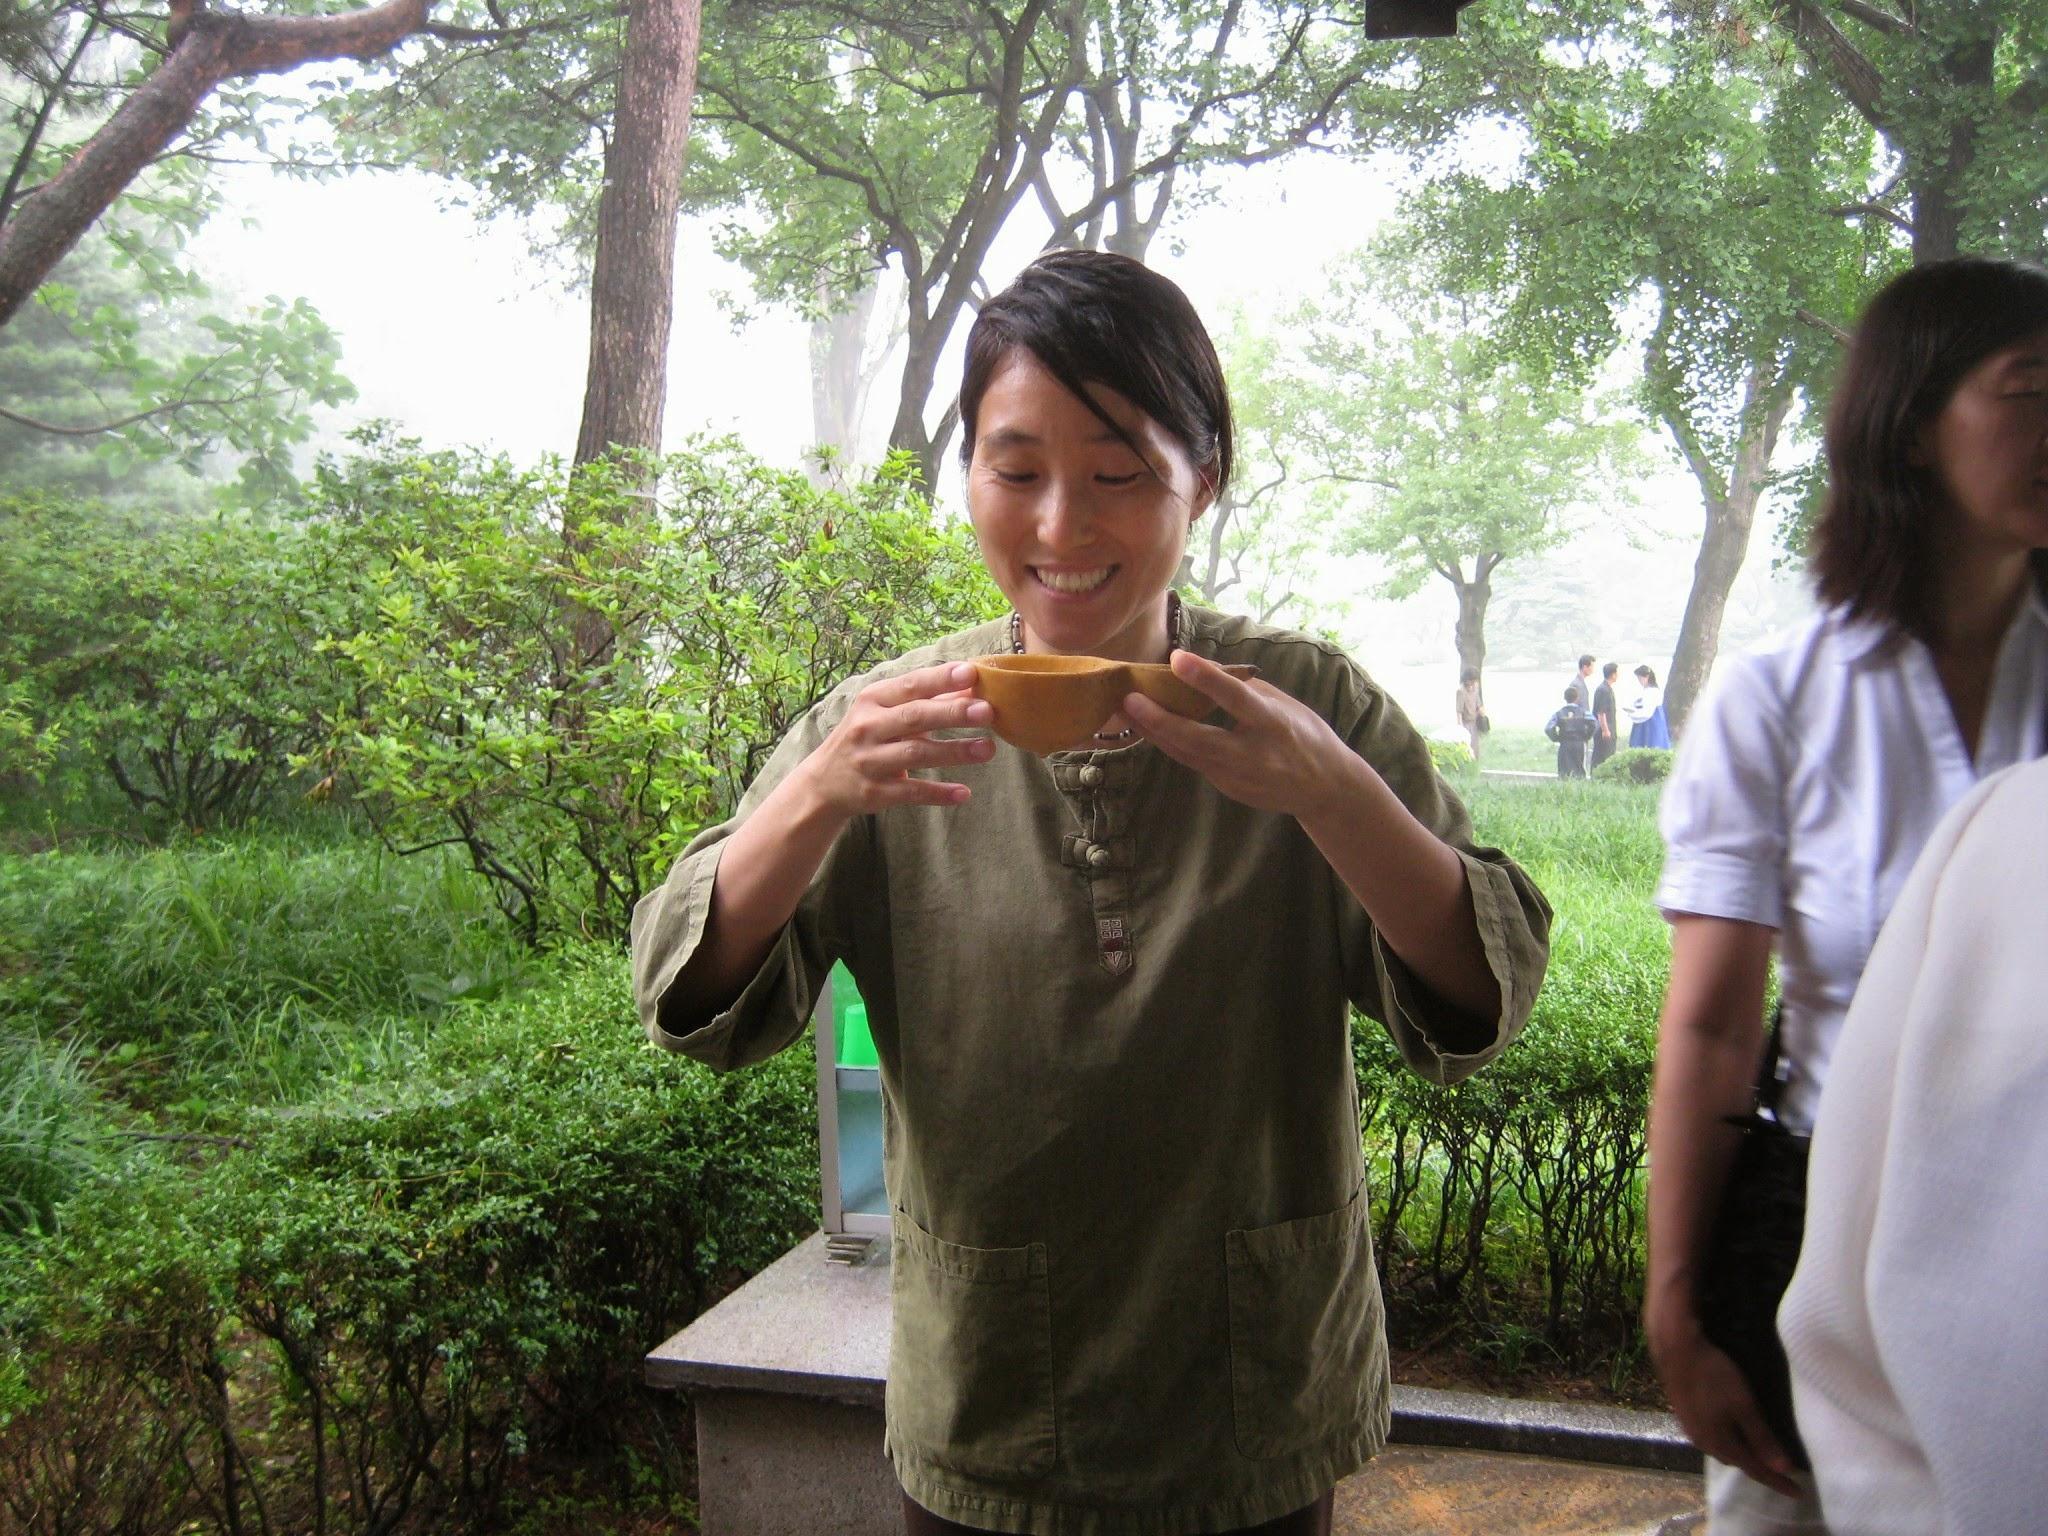 Hyun in the woods holding up a bowl made of squash full of water. She is smiling and about to drink the water.